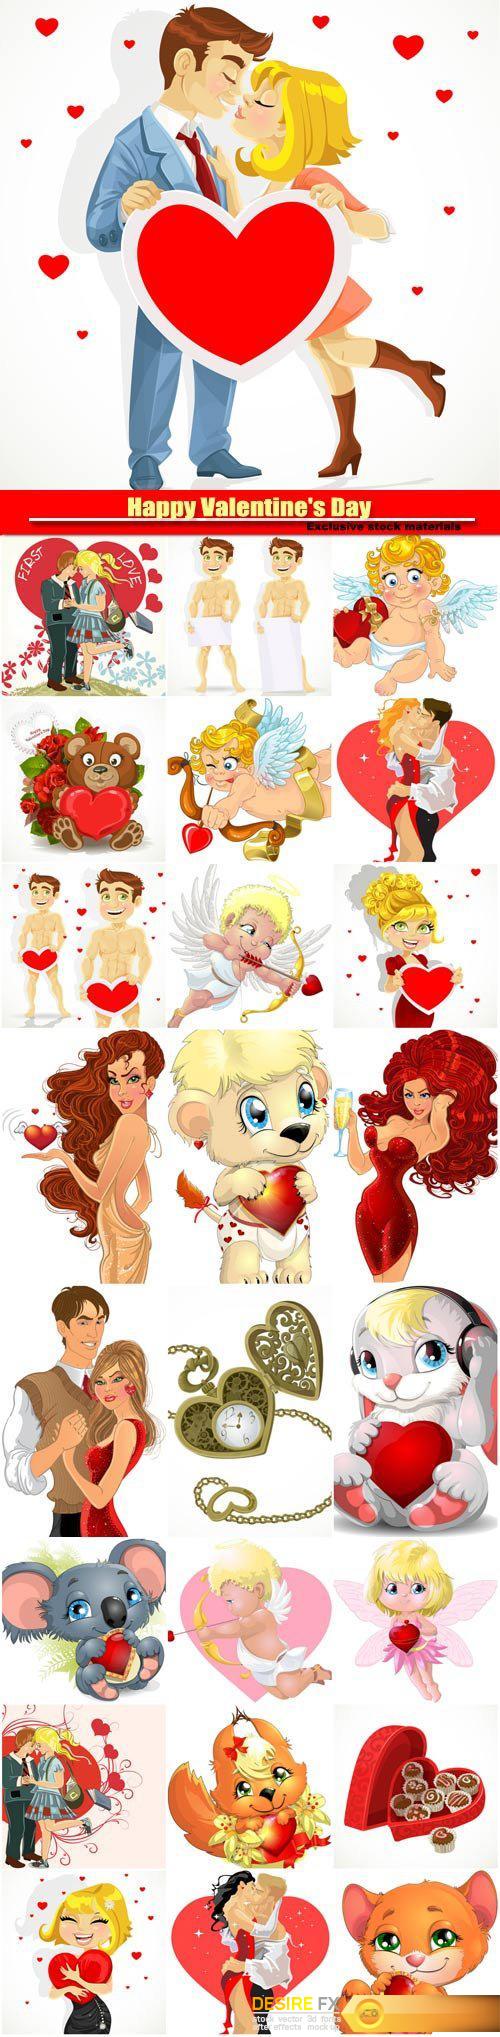 Happy Valentine's Day vector, couples, funny animals with hearts, cupids